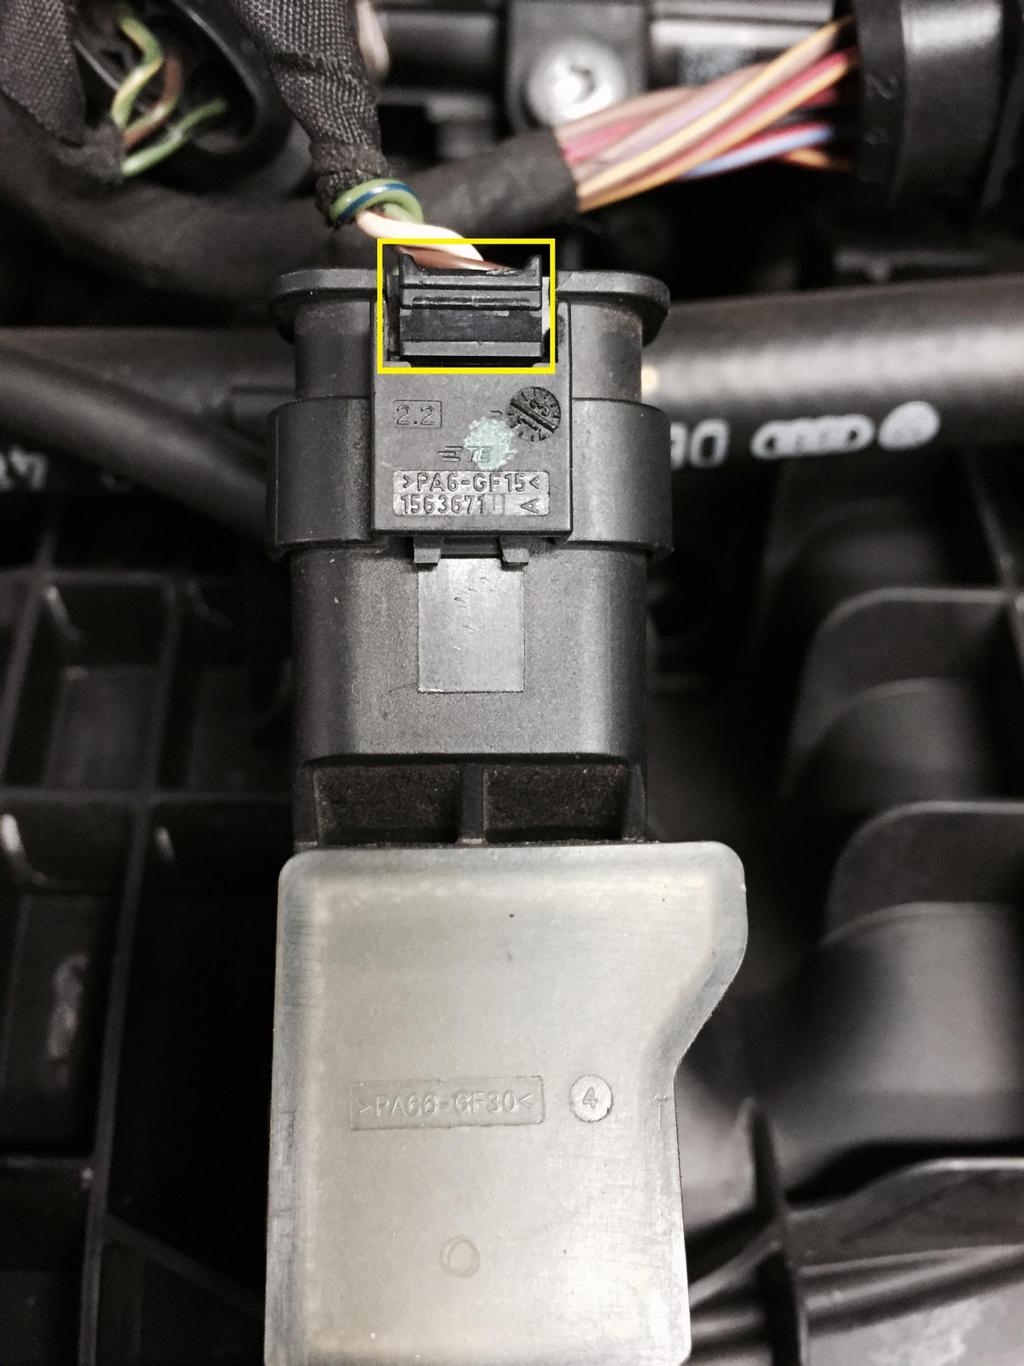 PLUG B: The boost sensor plug on the manifold is removed by pushing the grooved tab down on the end of the sensor (yellow square) and pulling the